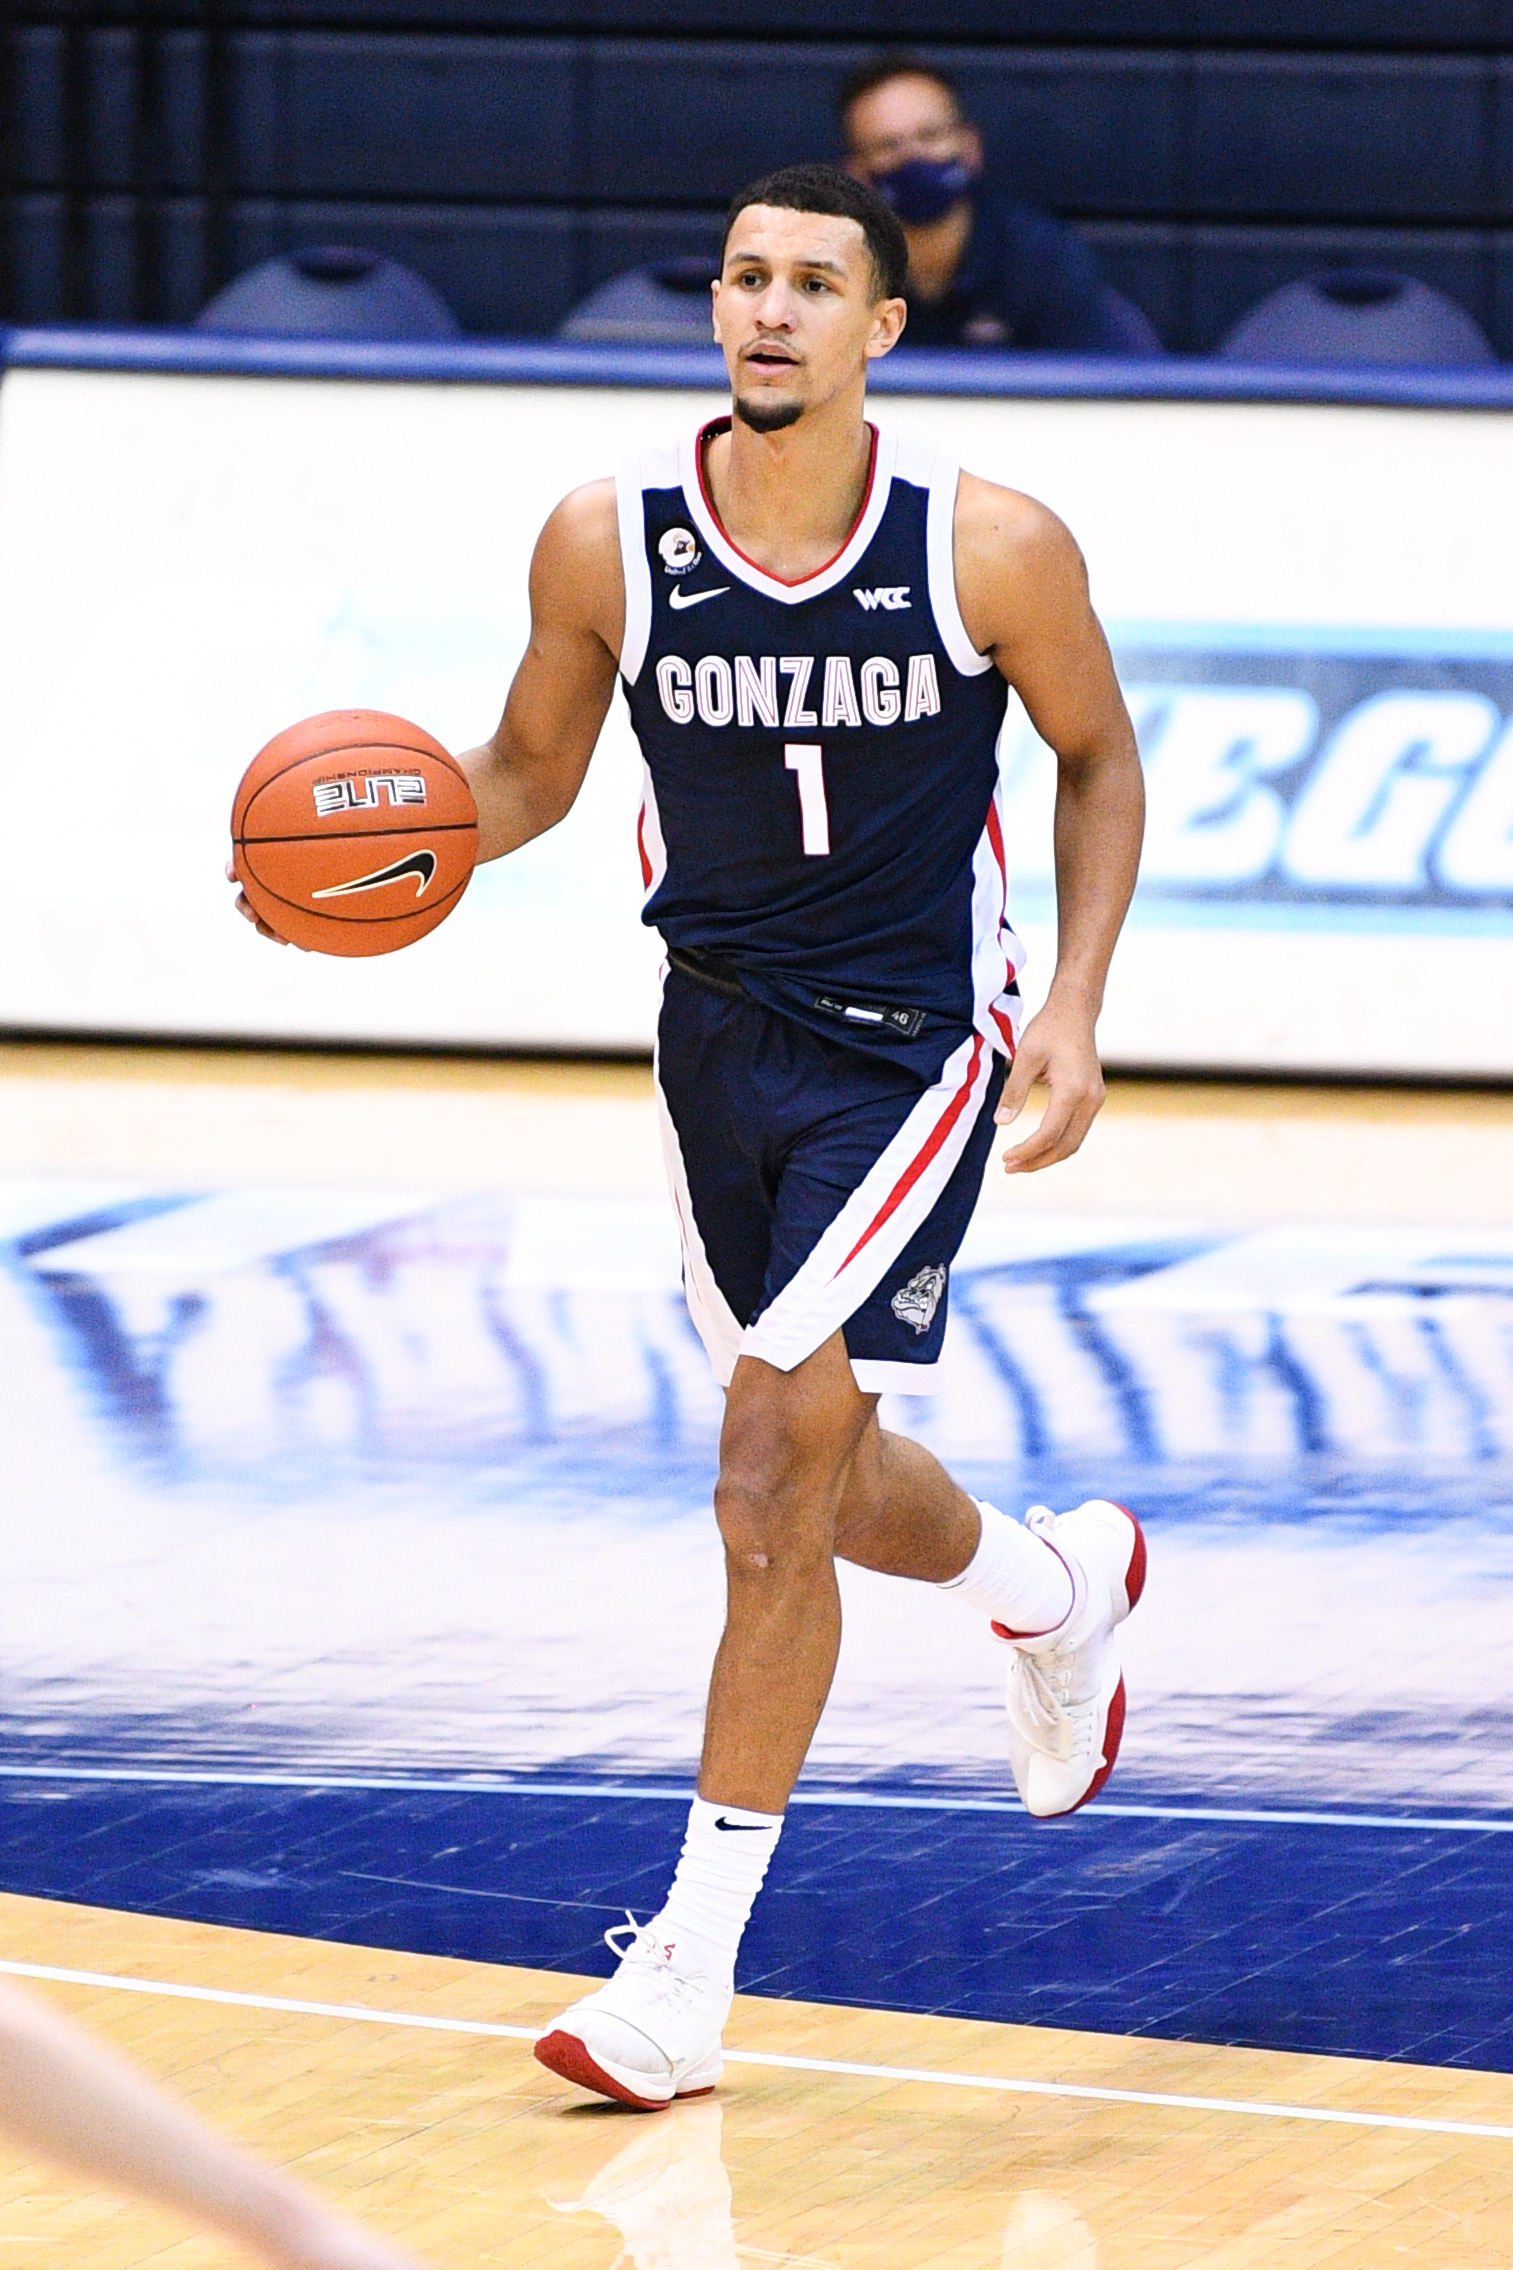 Gonzaga's Jalen Suggs was born for this March Madness moment